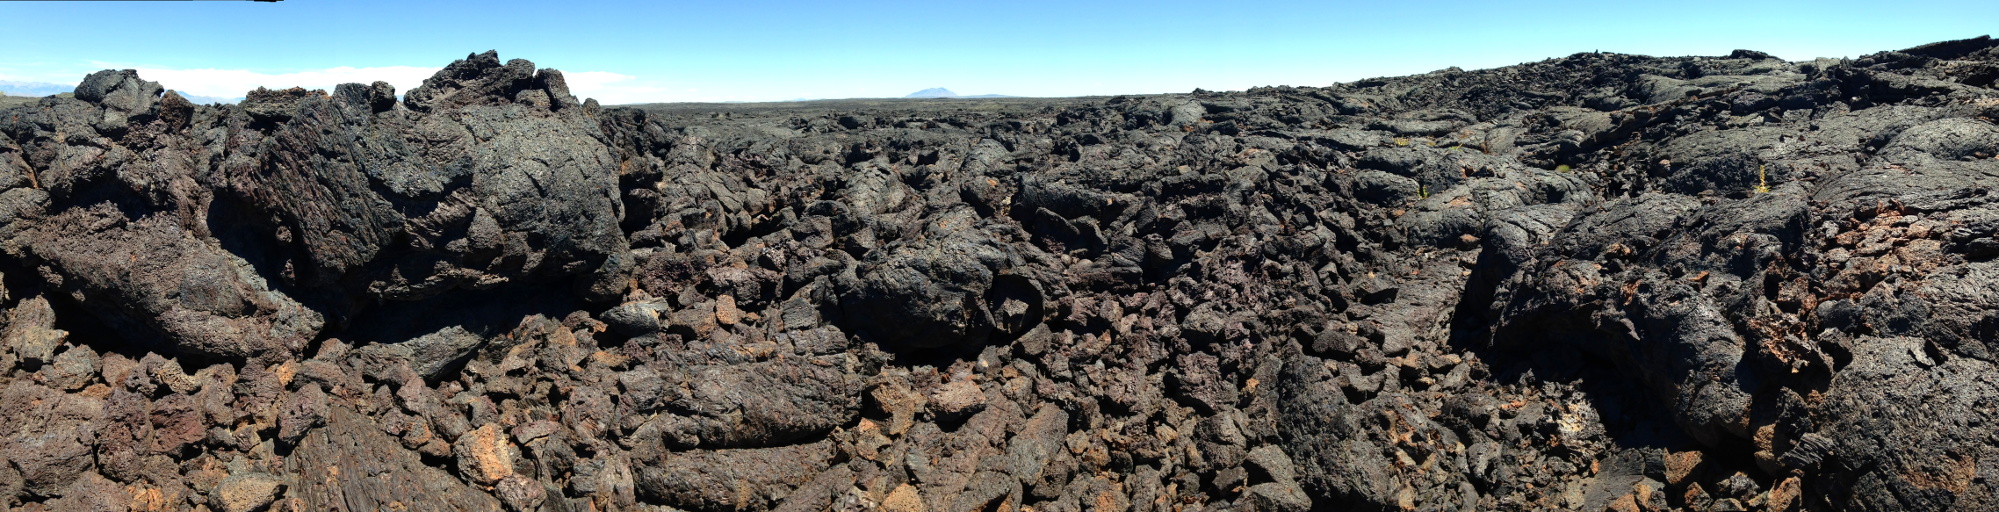 Craters of the Moon National Park (Category:  Rock Climbing)